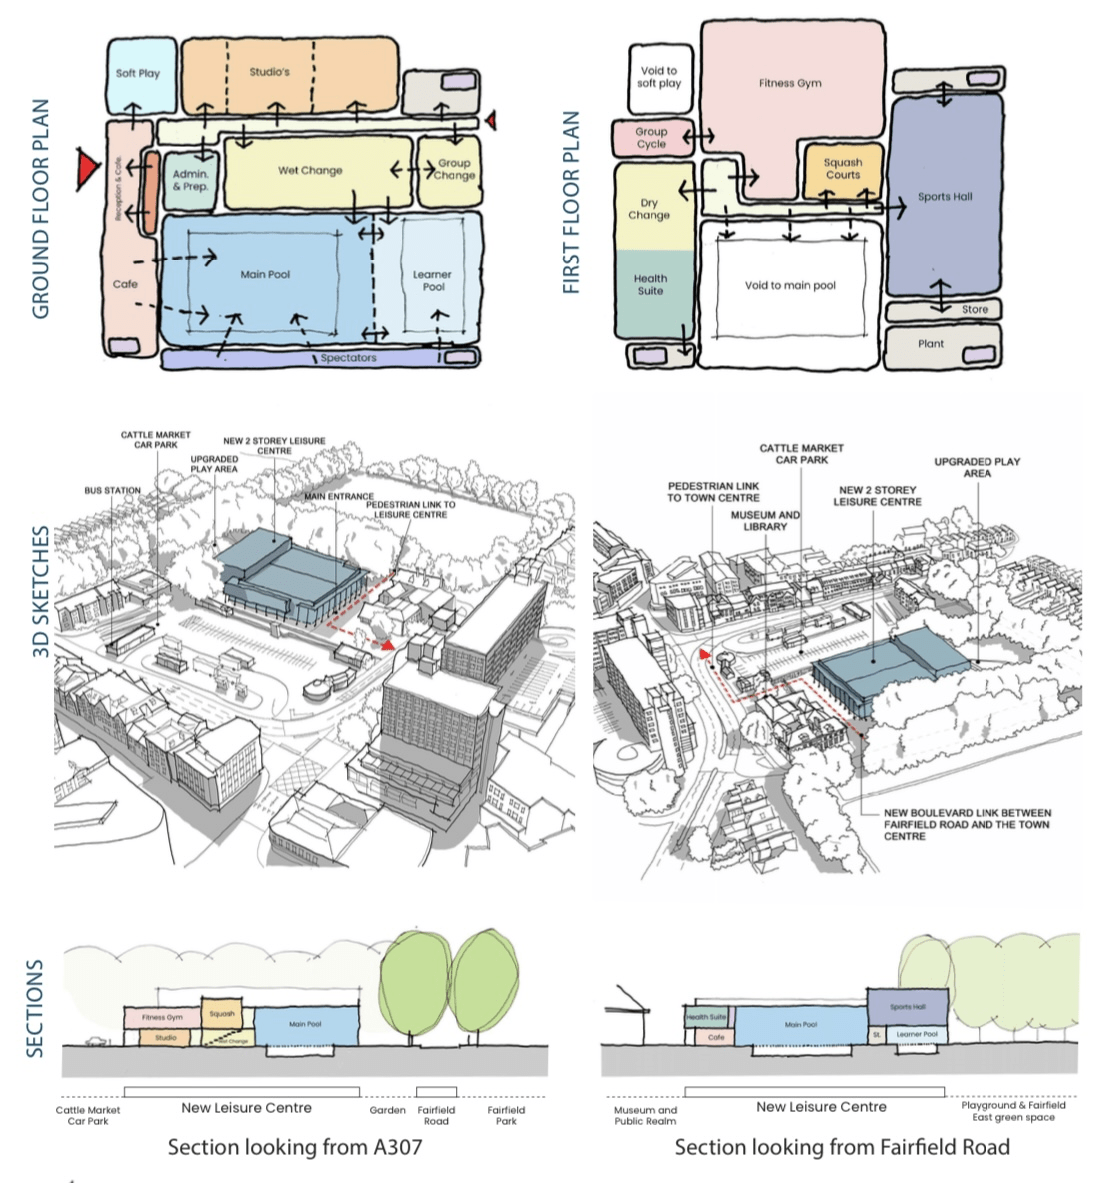 The most recent layout plans for the new centre, both inside and of the surrounding area.